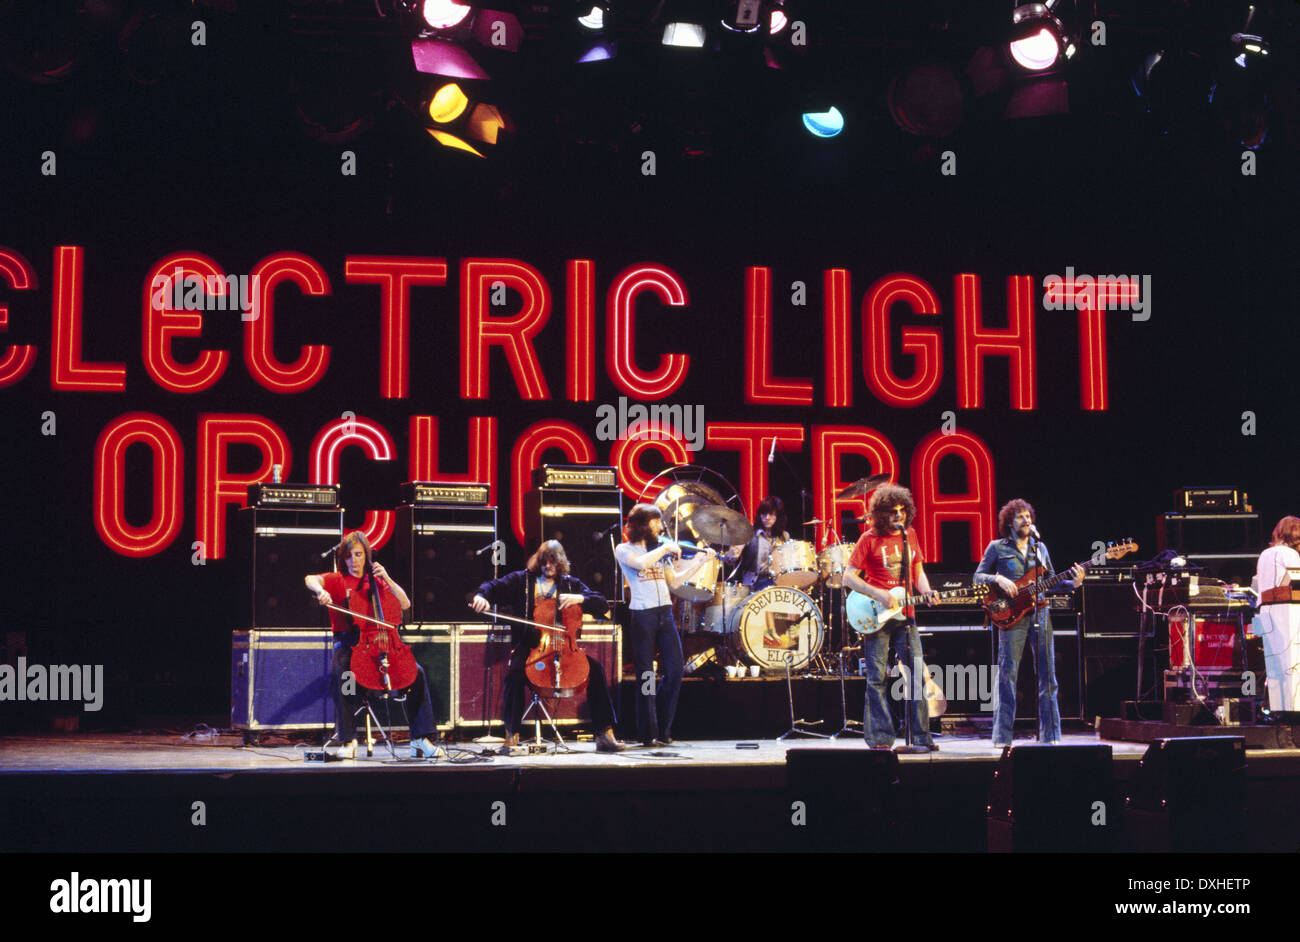 ELO - ELECTRIC LIGHT ORCHESTRA - UK rock group in September 1978 Stock Photo